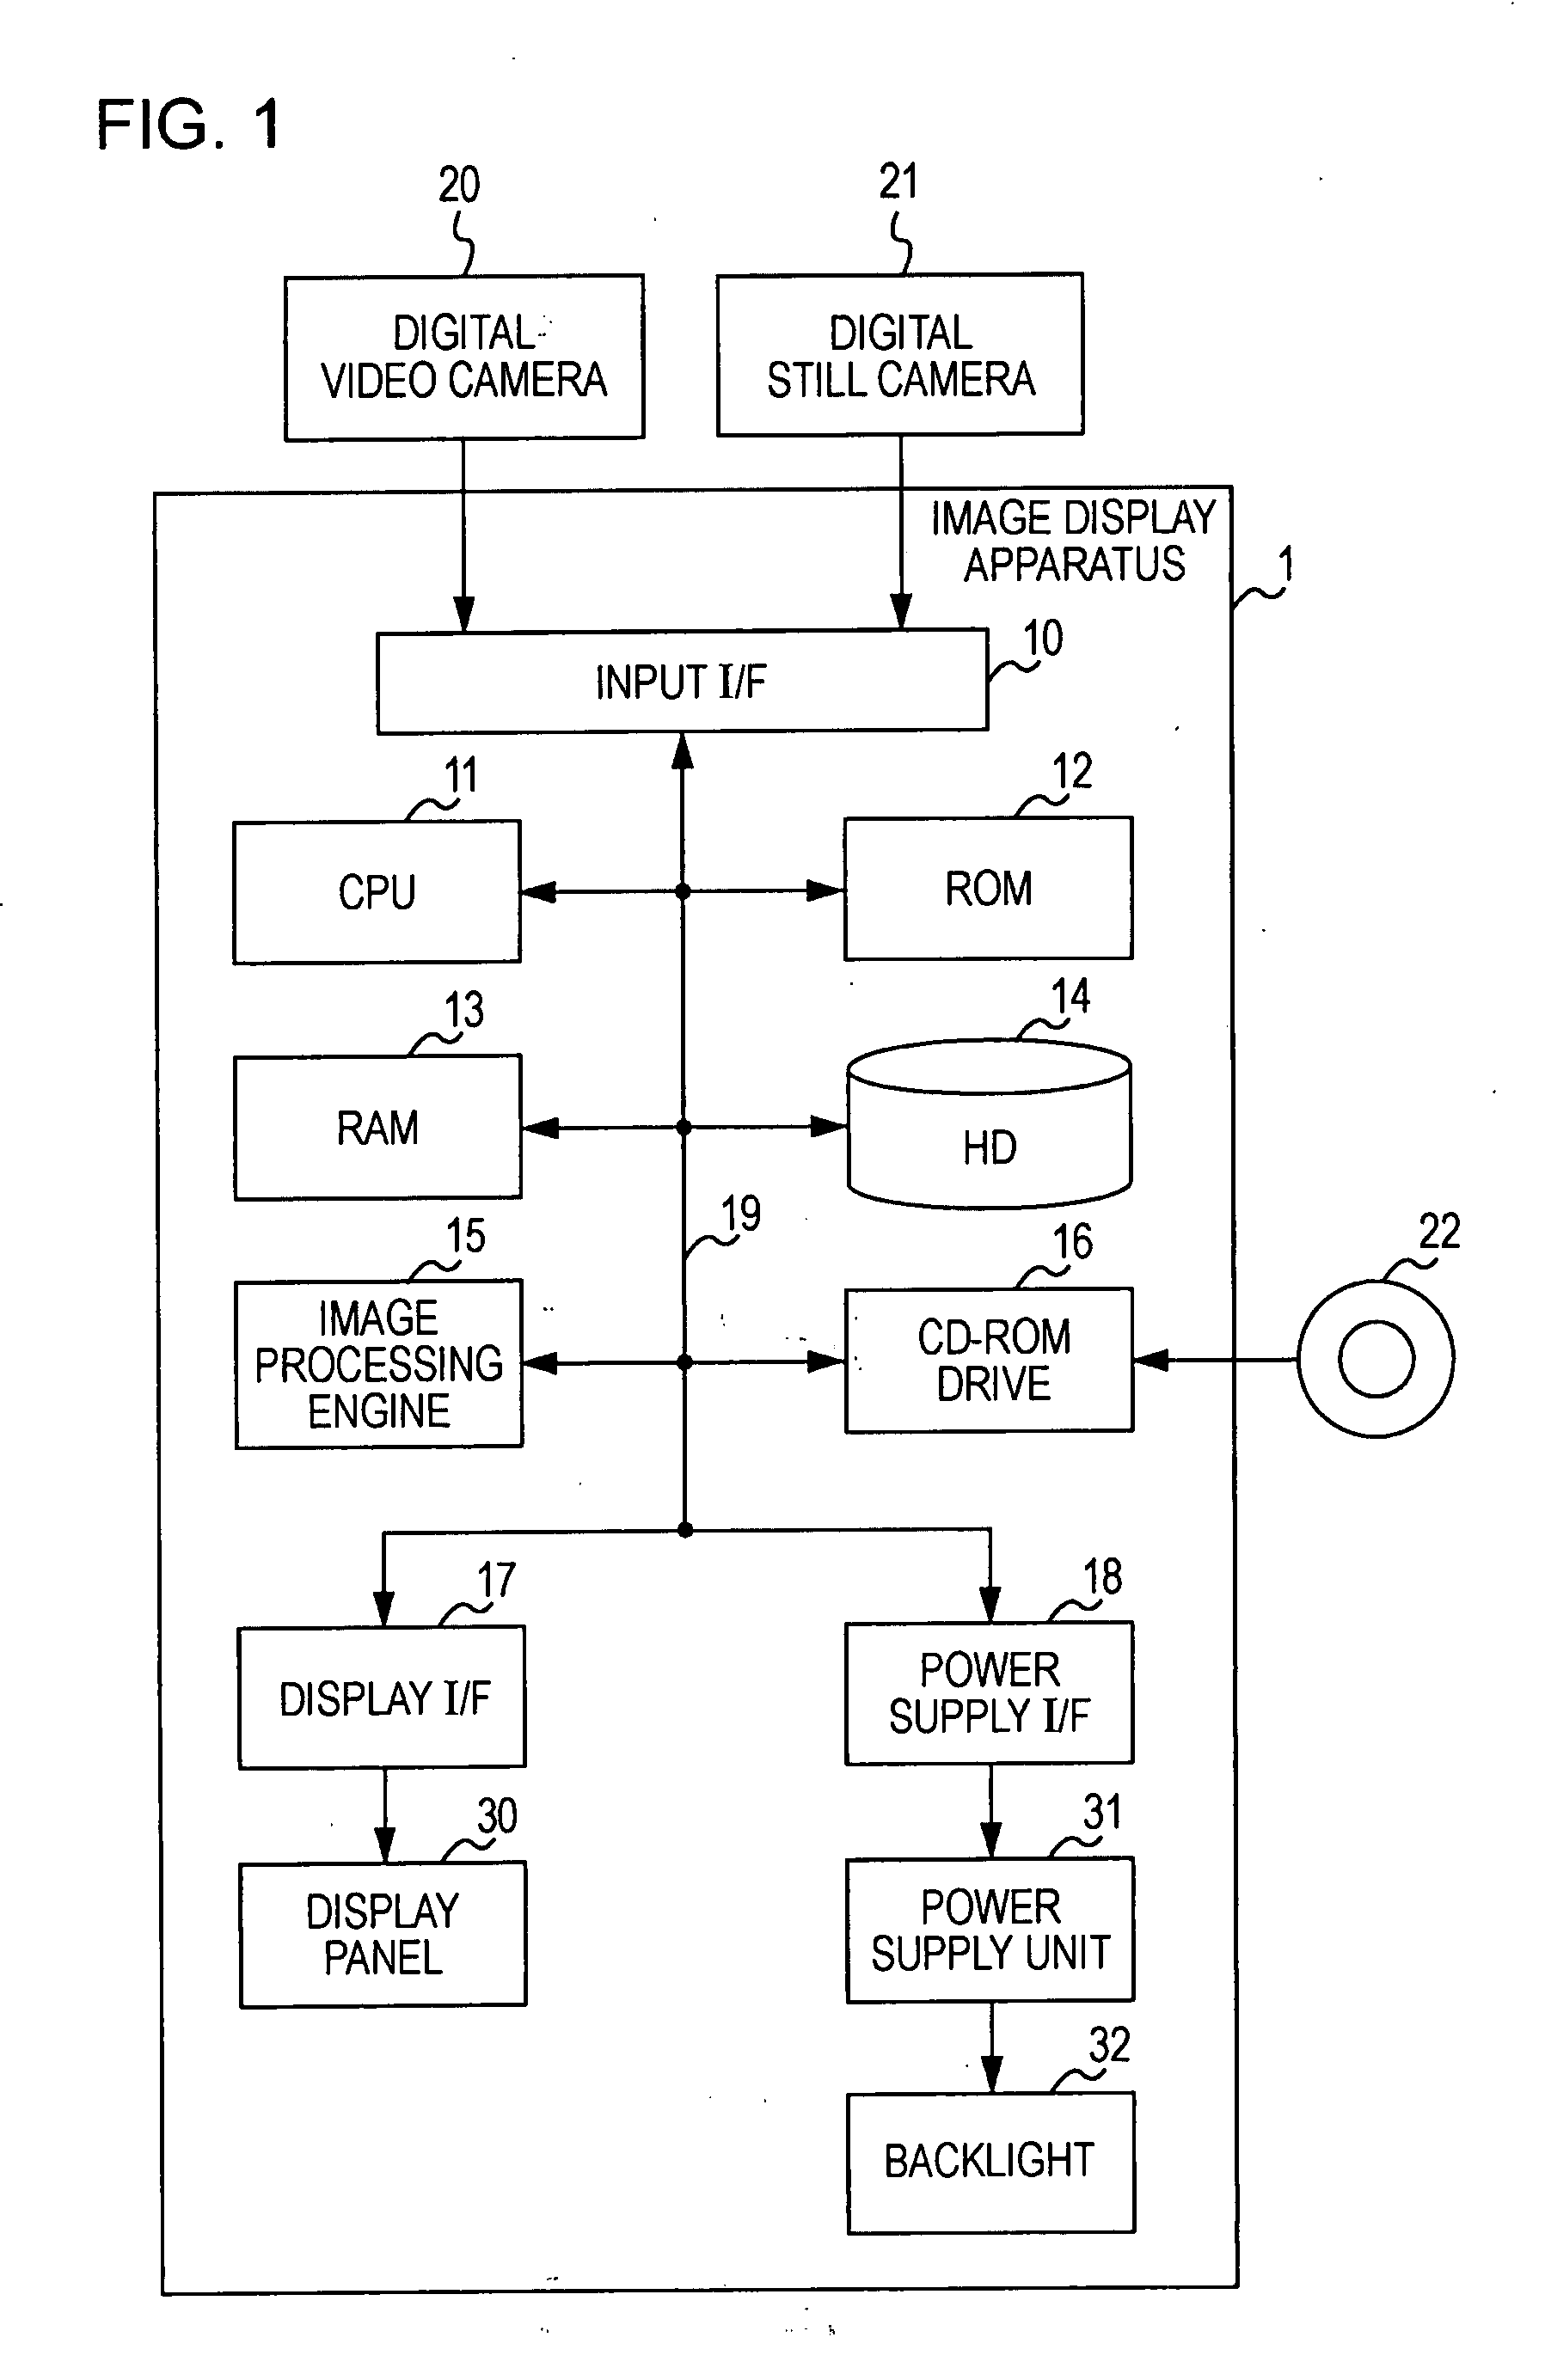 Image display apparatus and electronic apparatus